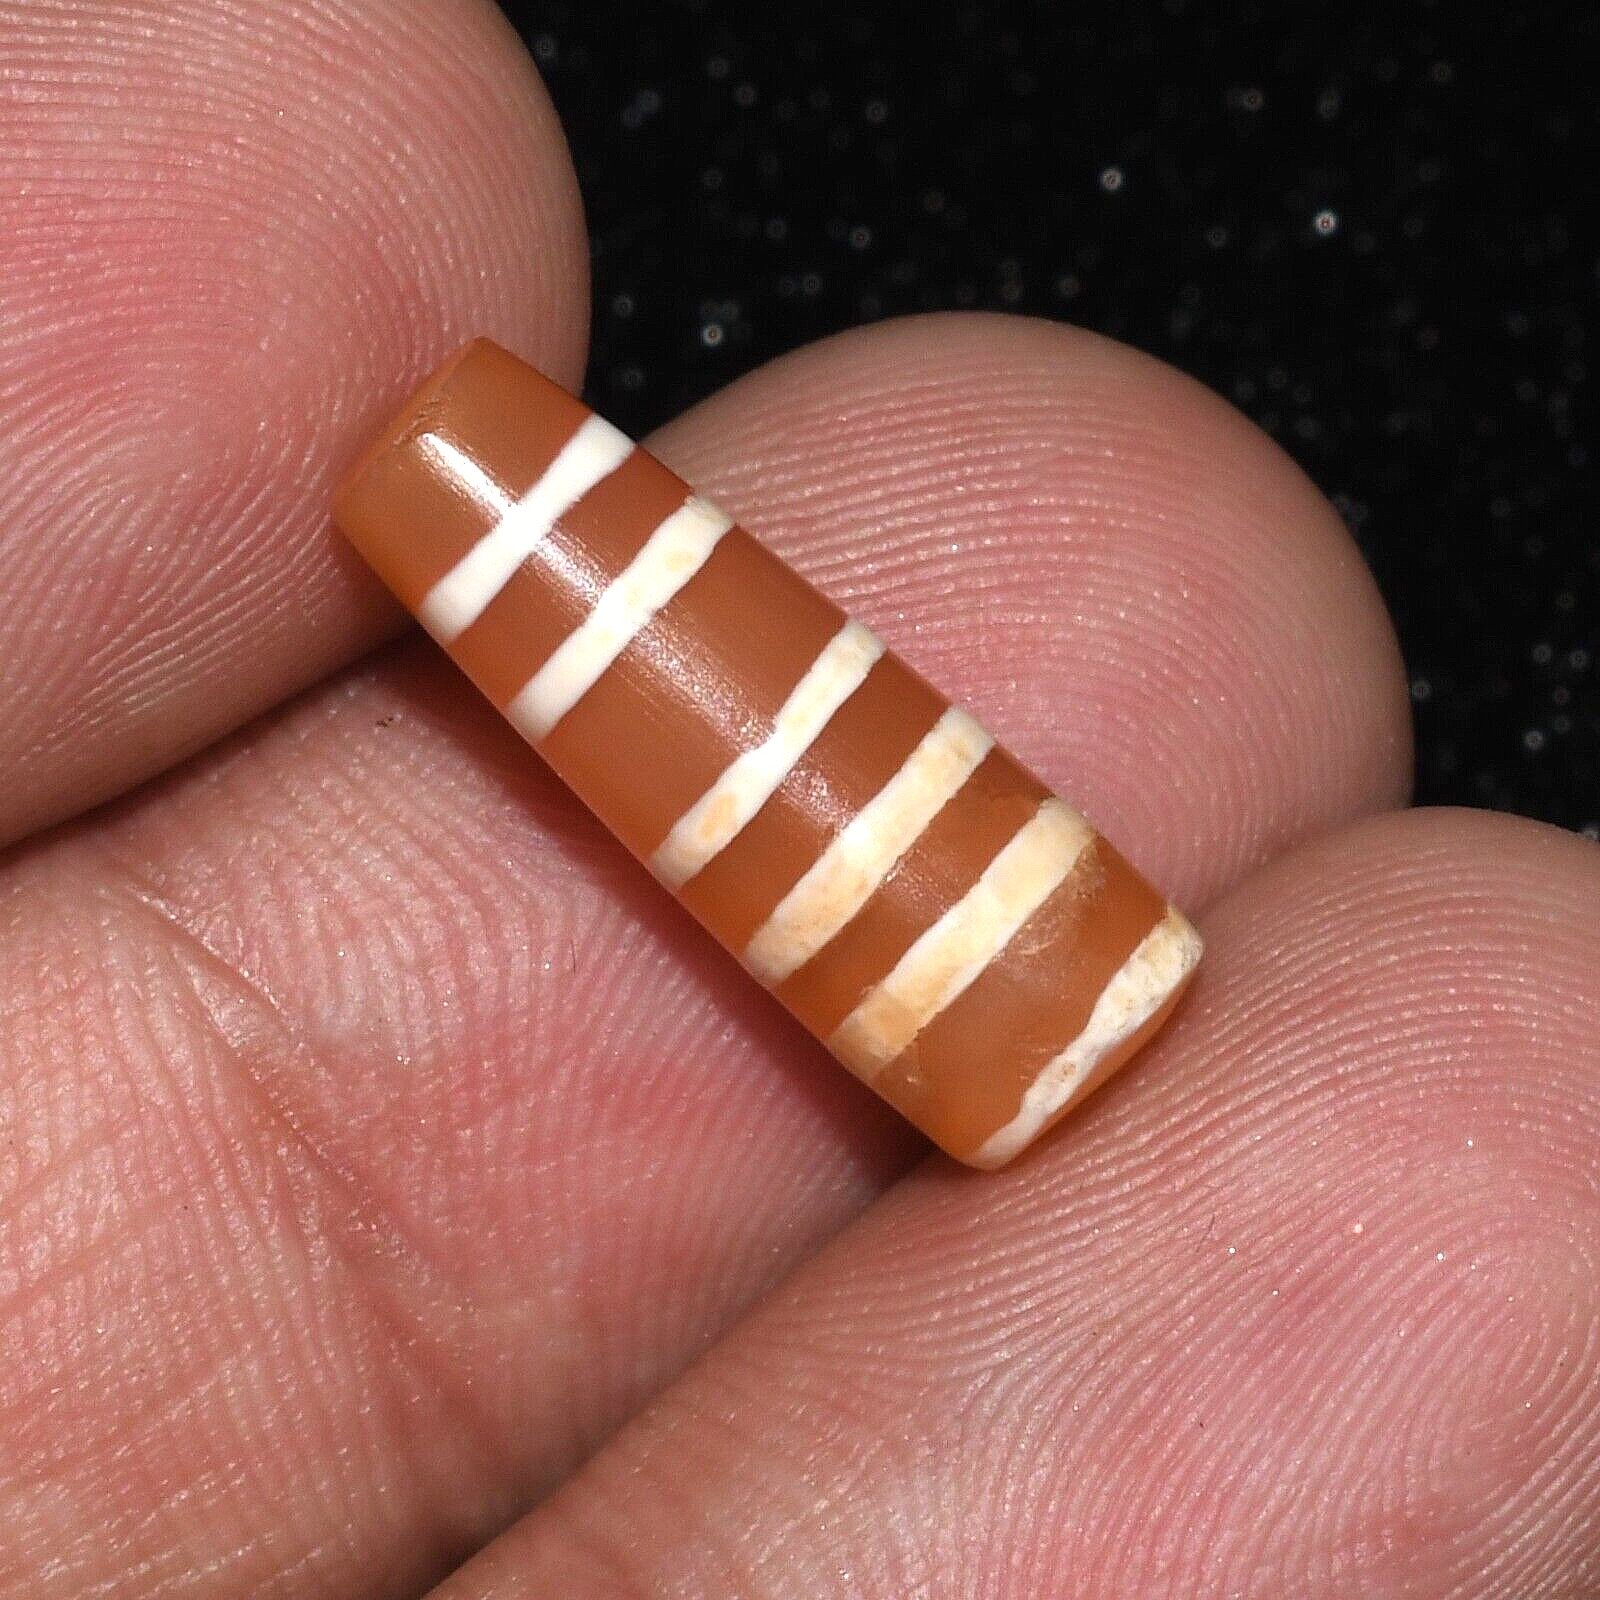 Genuine Ancient Burmese Pyu Culture Etched Carnelian Bead with 6 Stripes